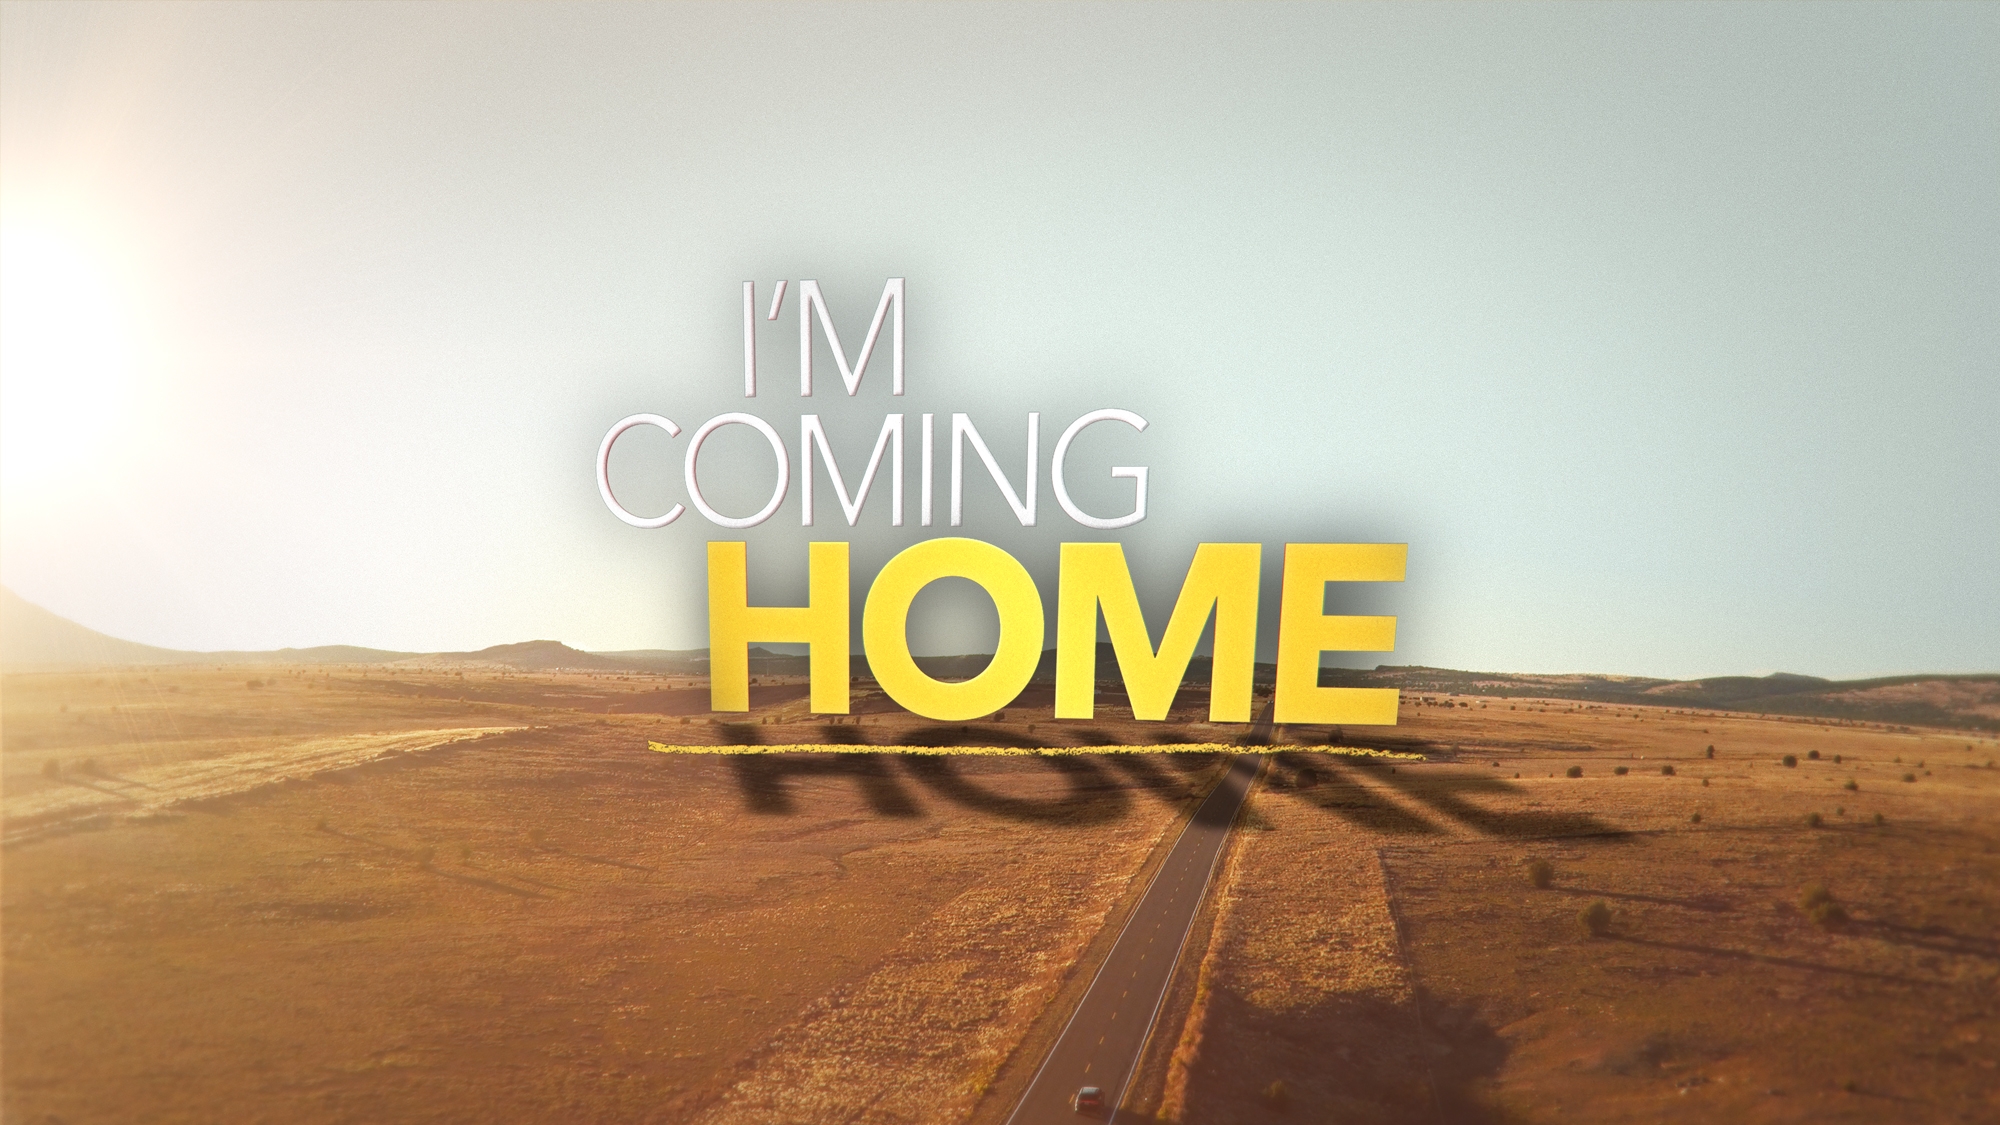 Coming home pictures